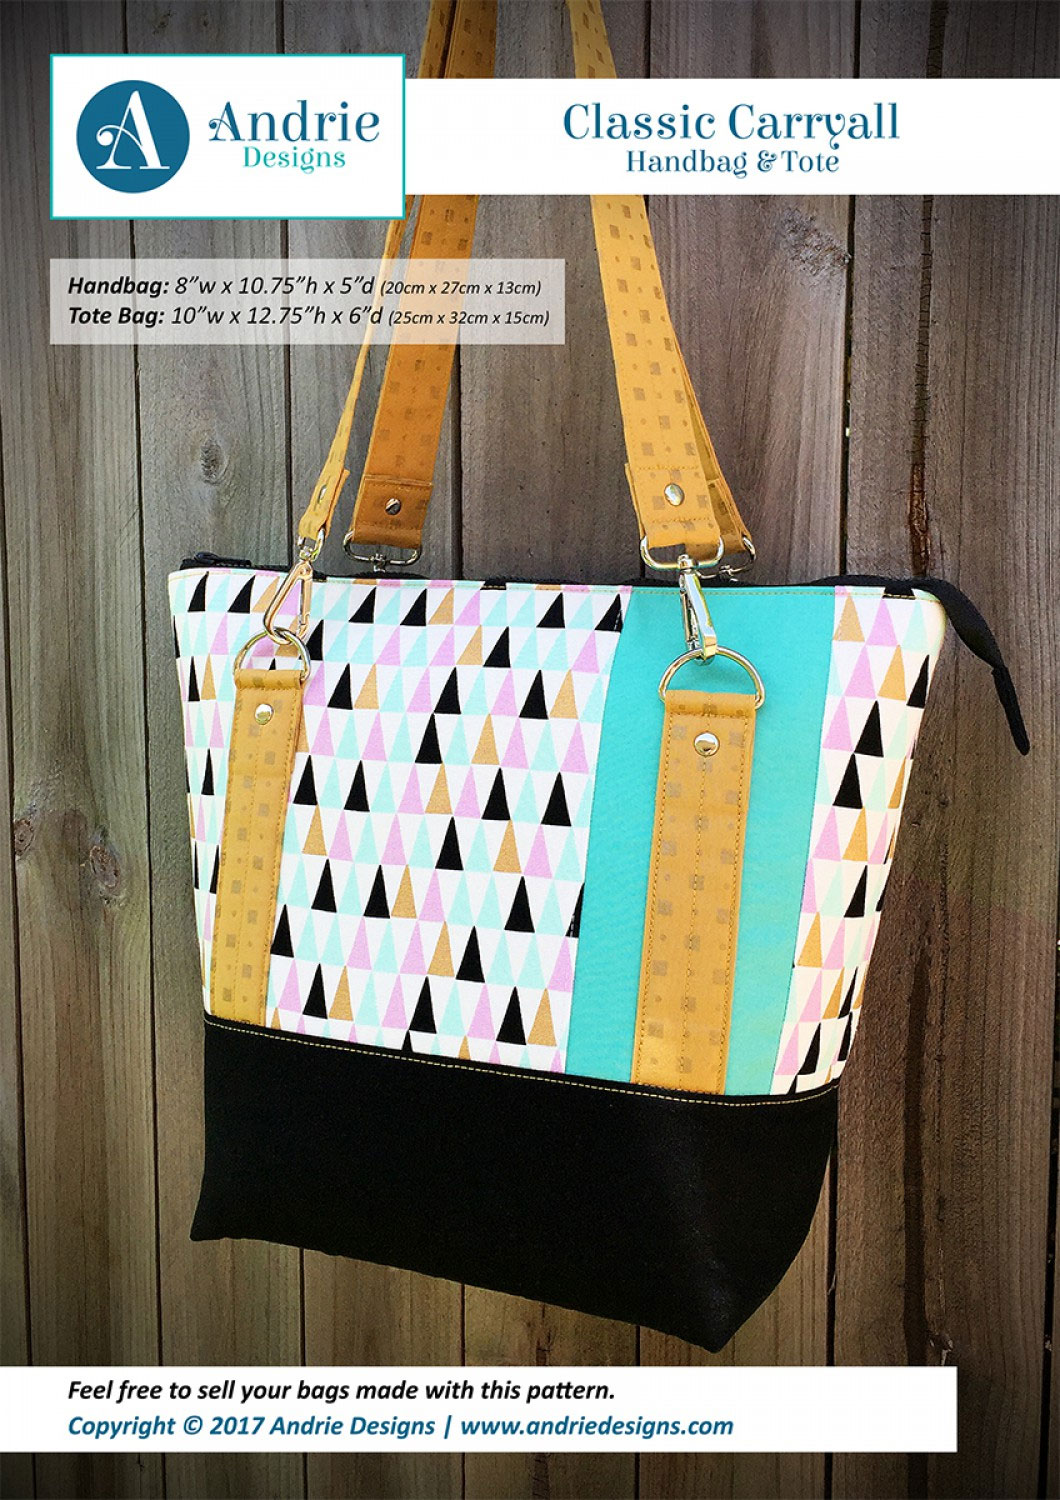 classic-carryall-handbag-and-tote-sewing-pattern-andrie-designs-front